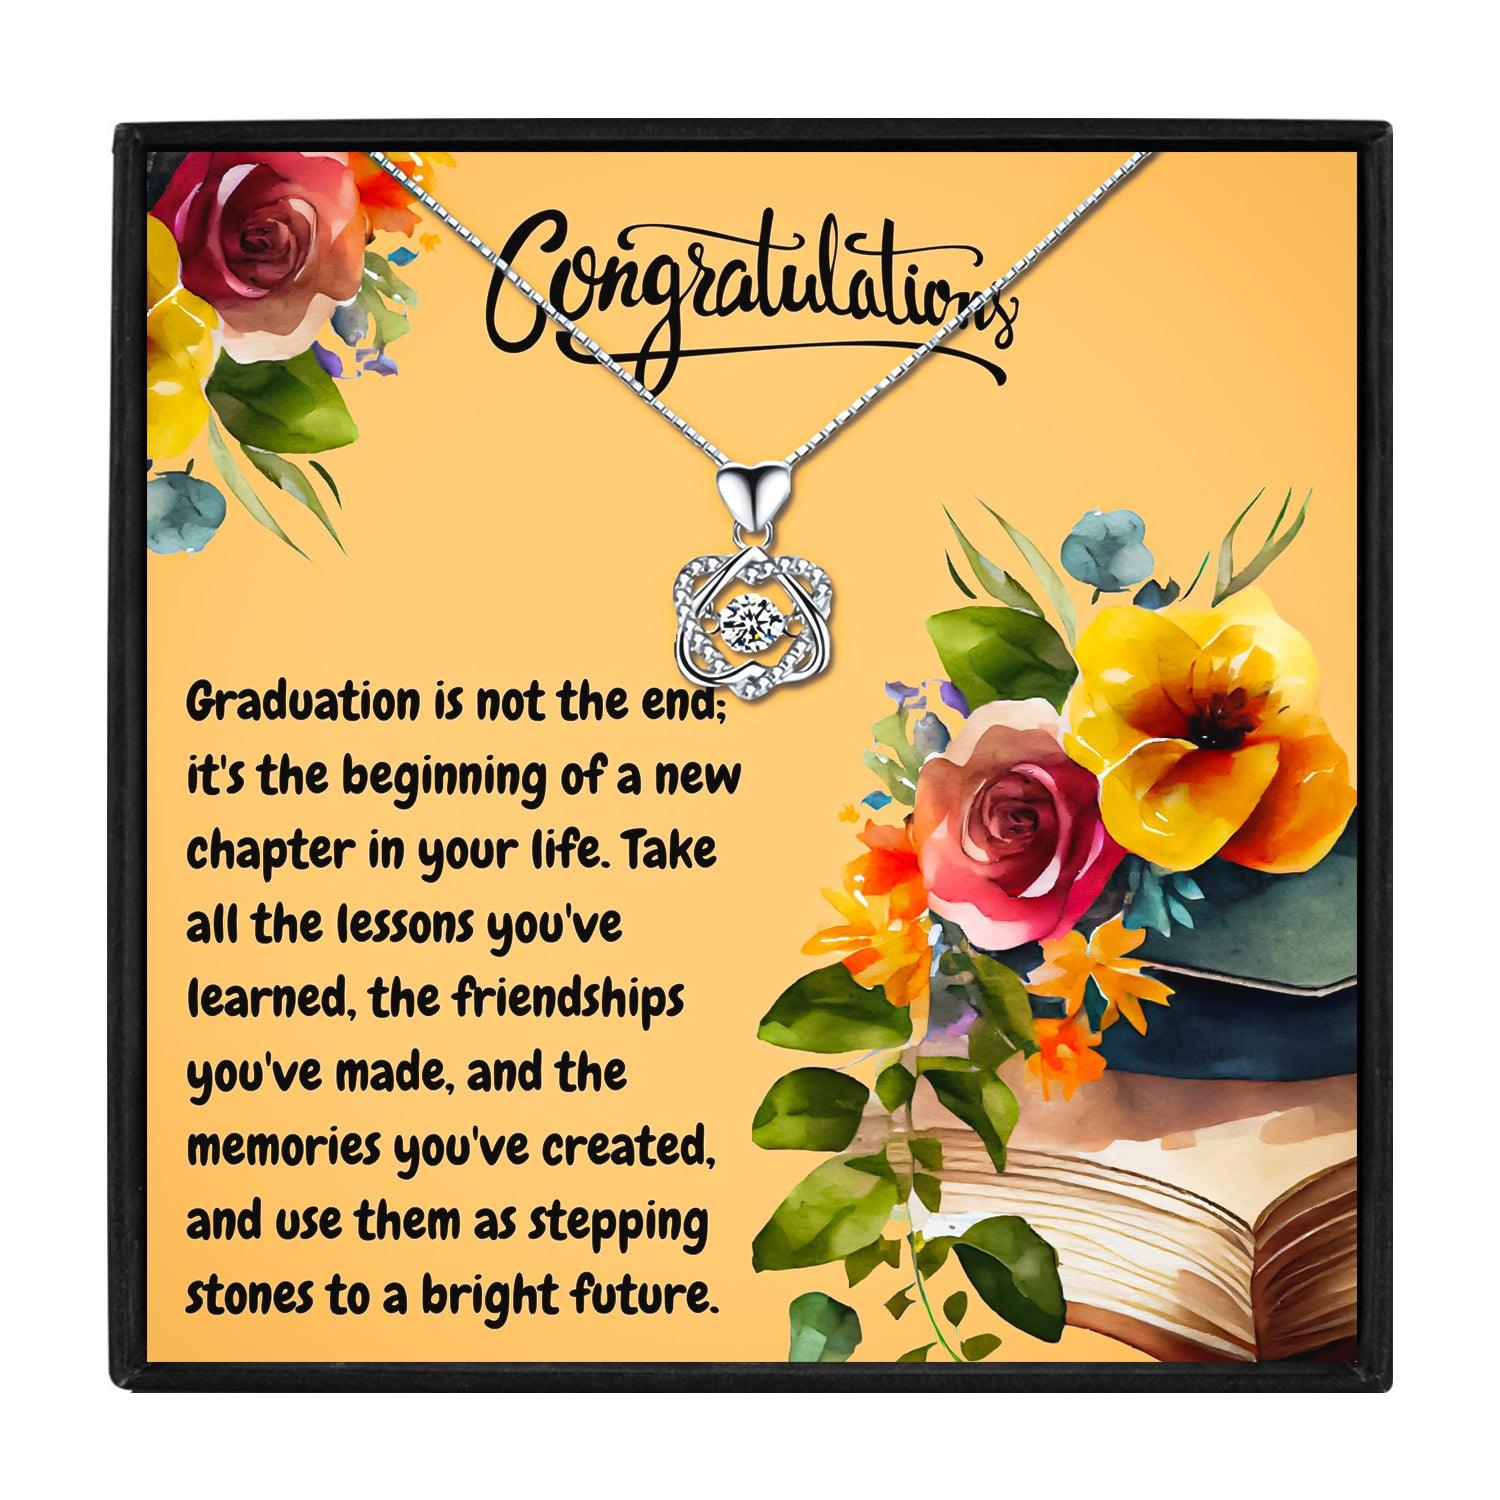 Inspirational Necklace Card has special message and charm